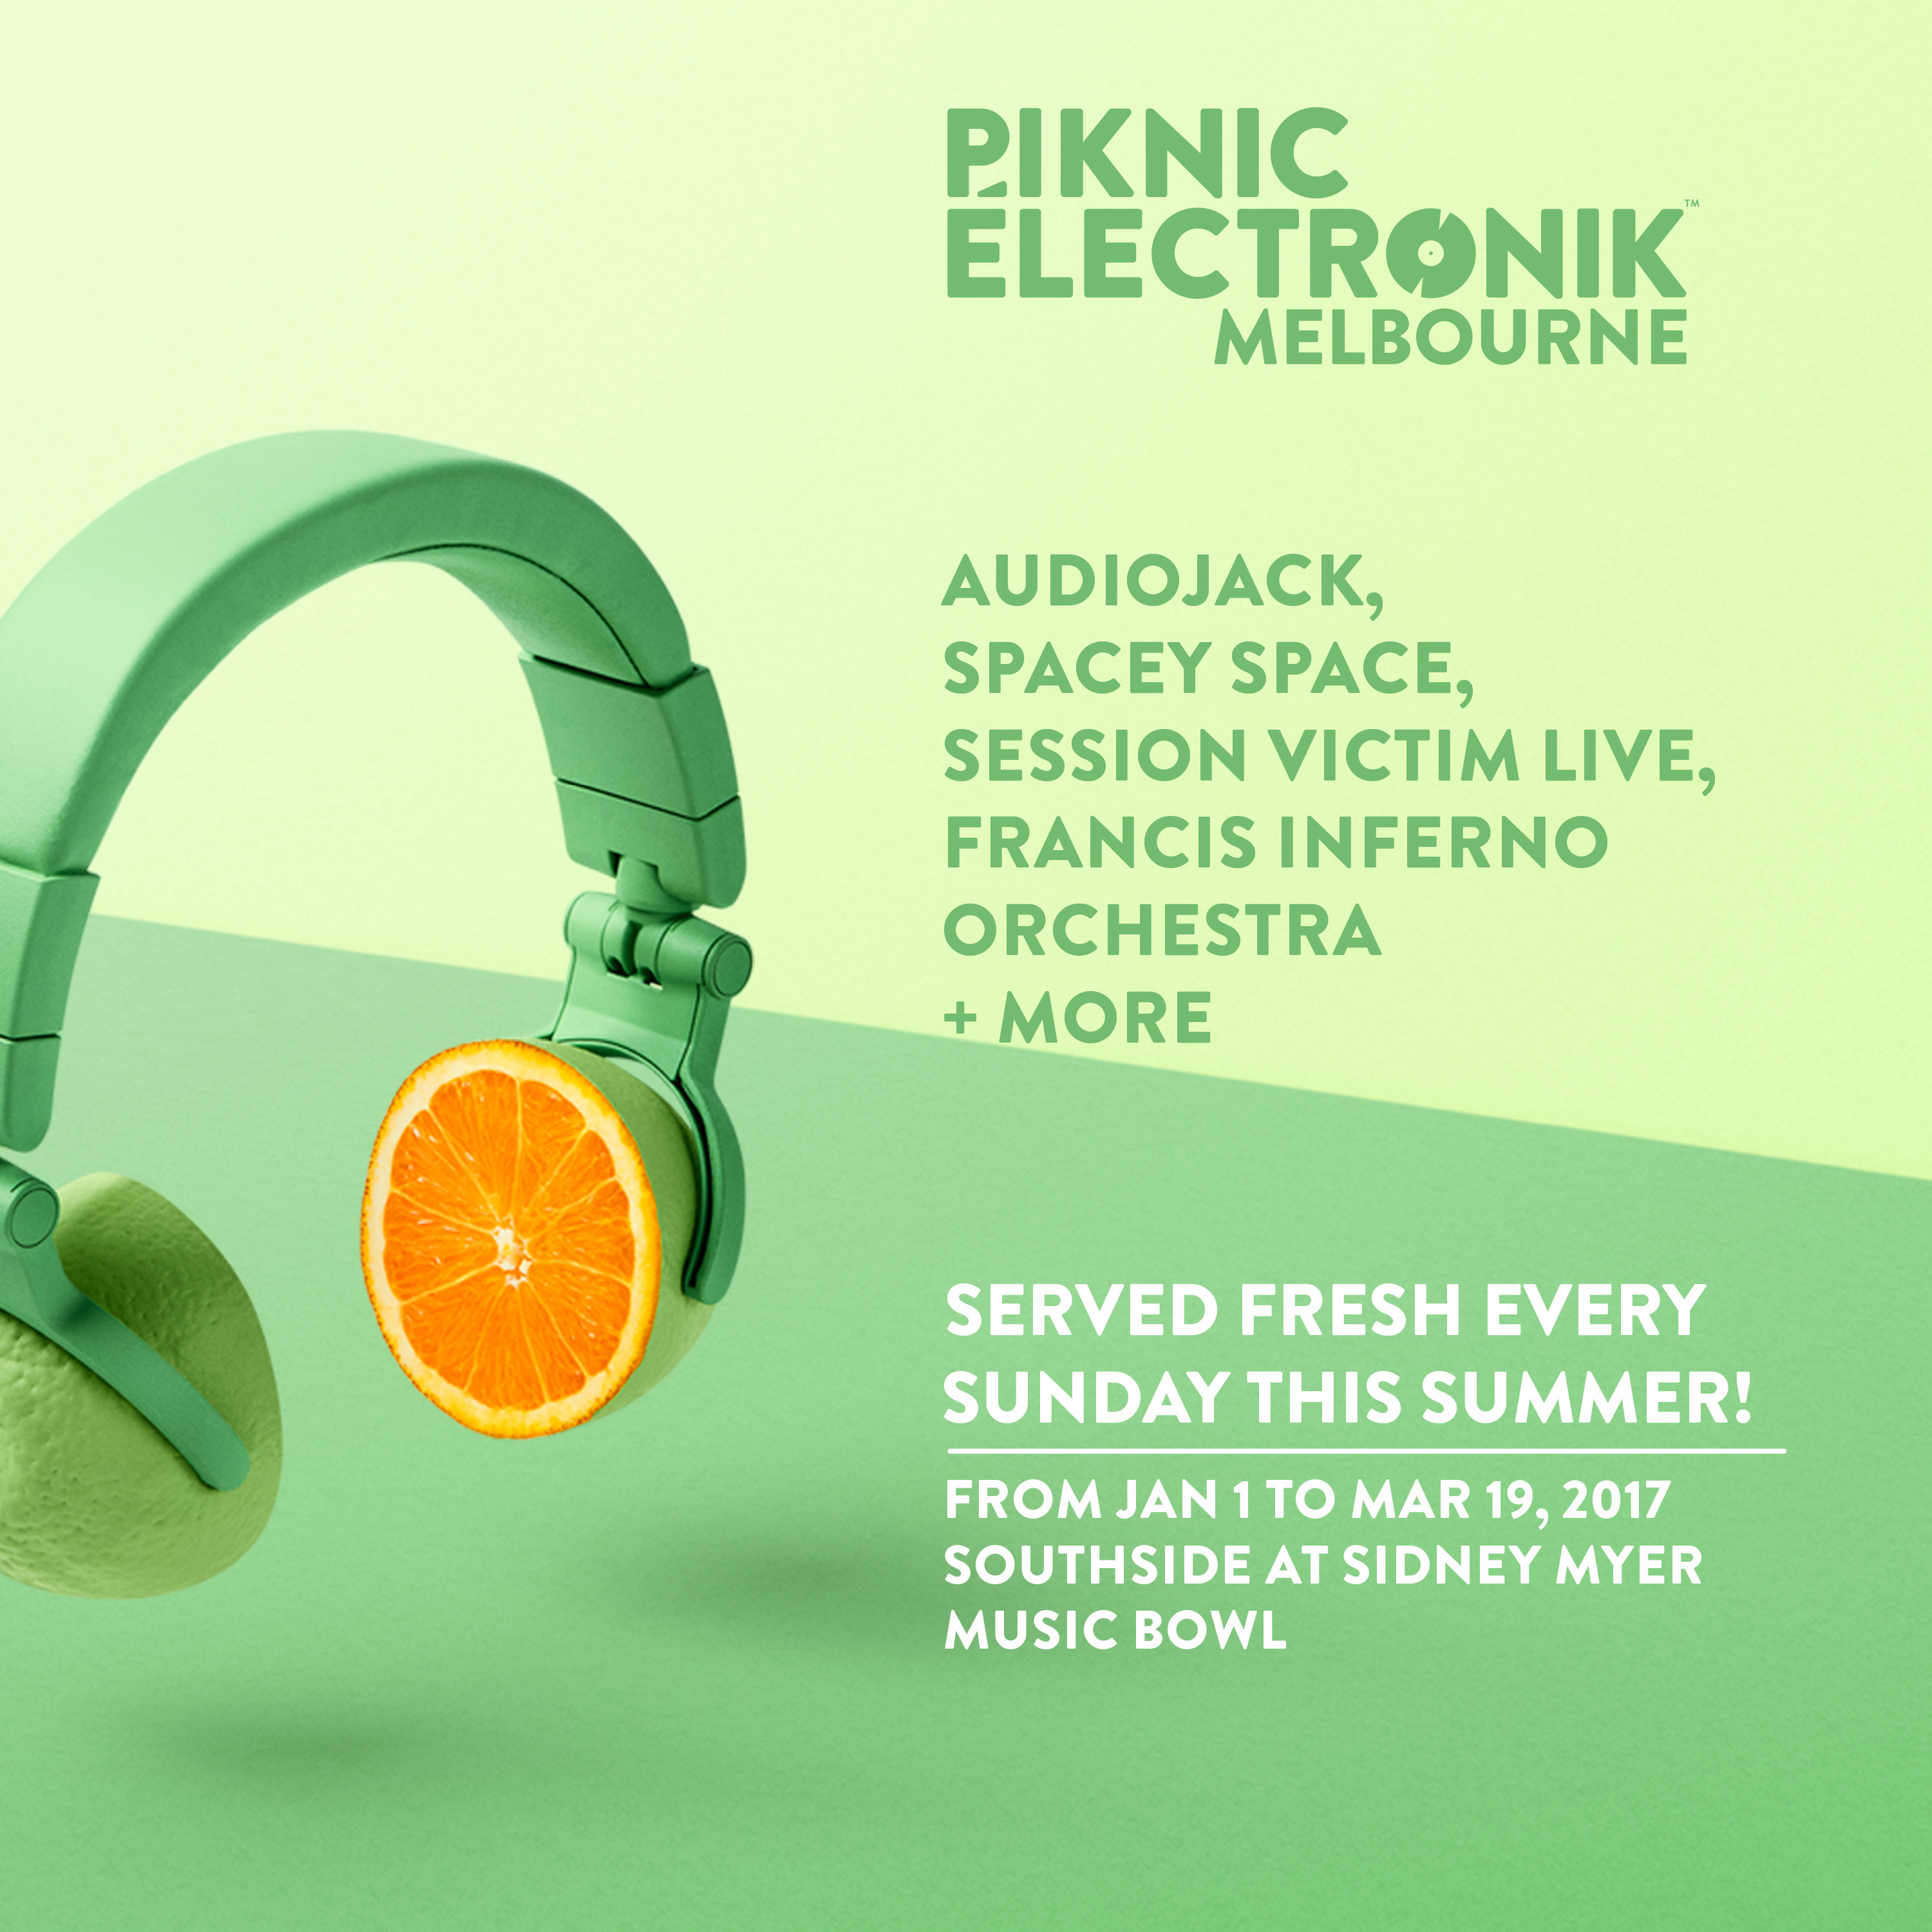 Melbourne’s Piknic Electronik Reveal Lineup And New Venue!